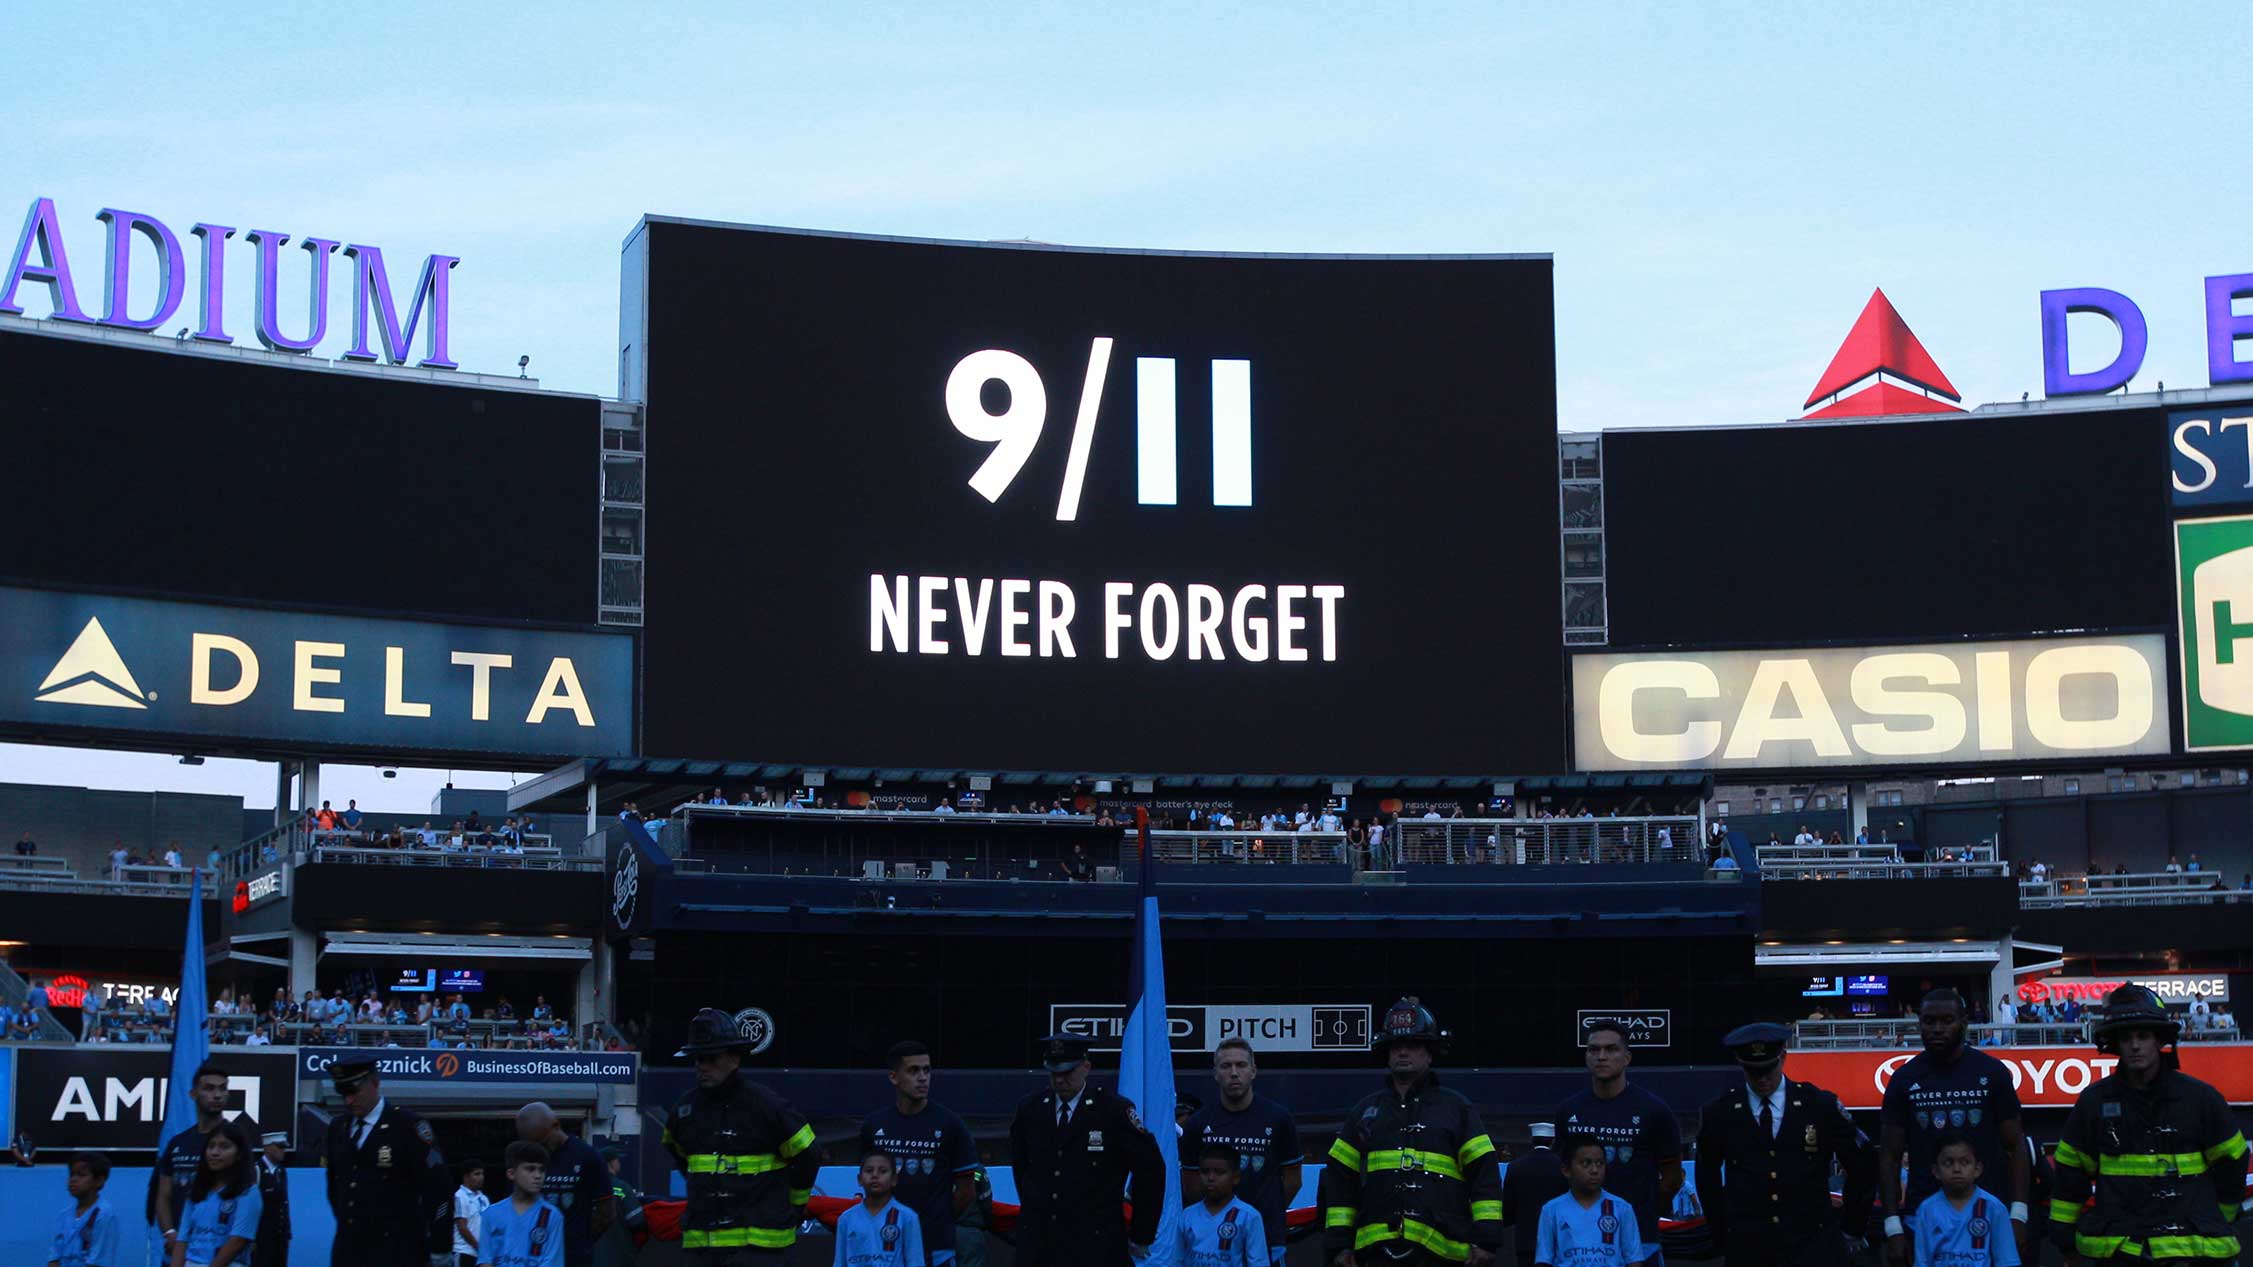 New York Yankees, NY Mets to play on 20th anniversary of 9/11